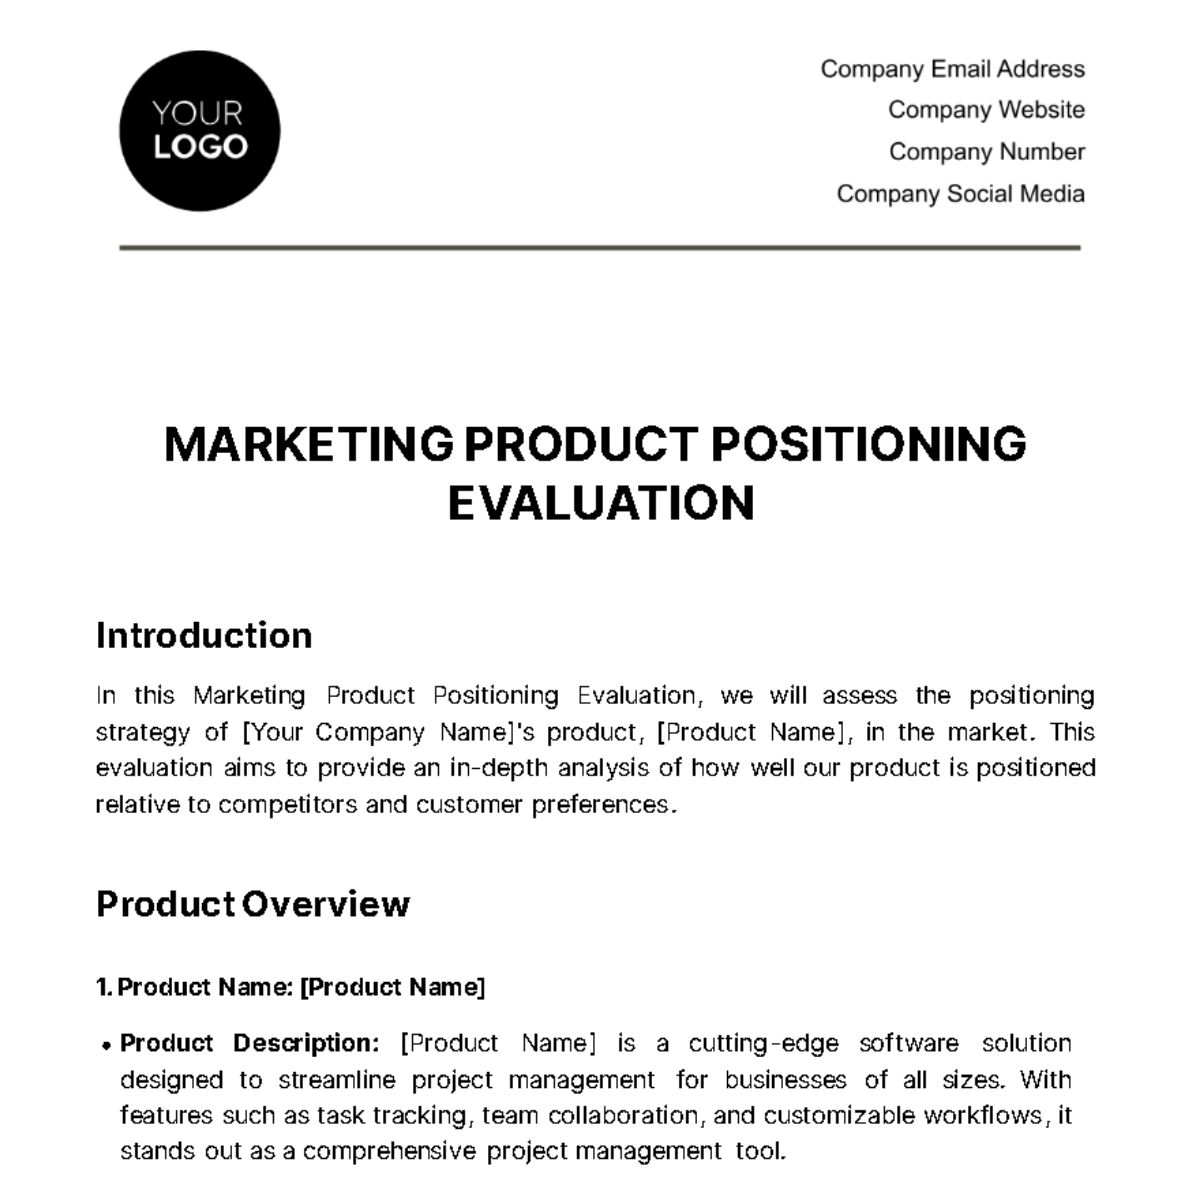 Marketing Product Positioning Evaluation Template